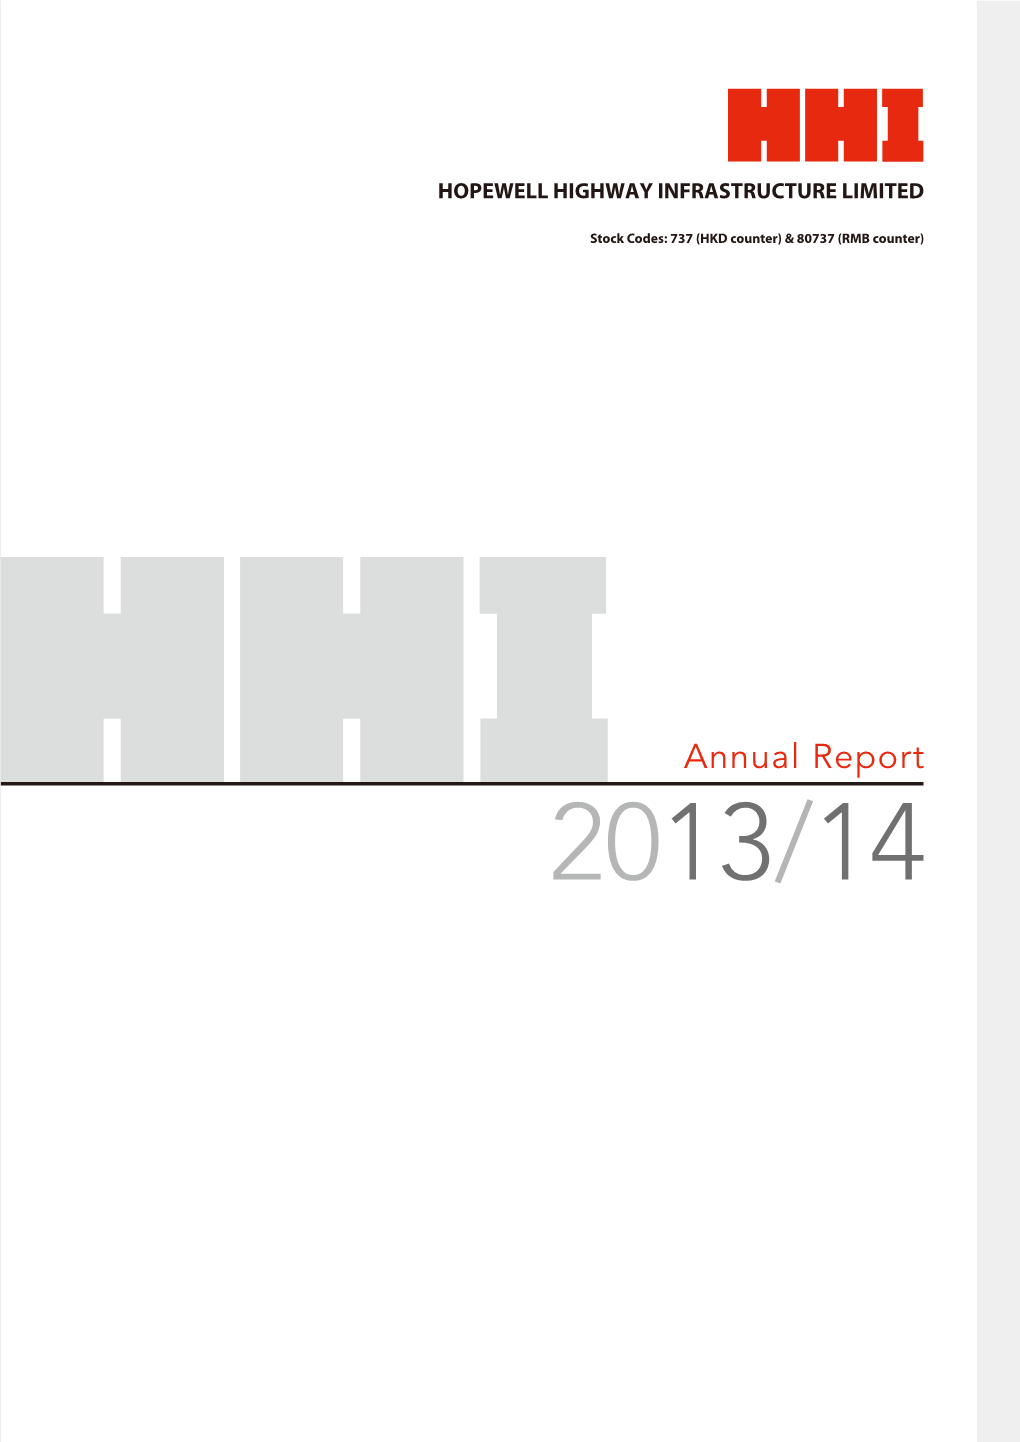 Annual Report 2013/14 10-Year Financial Summary